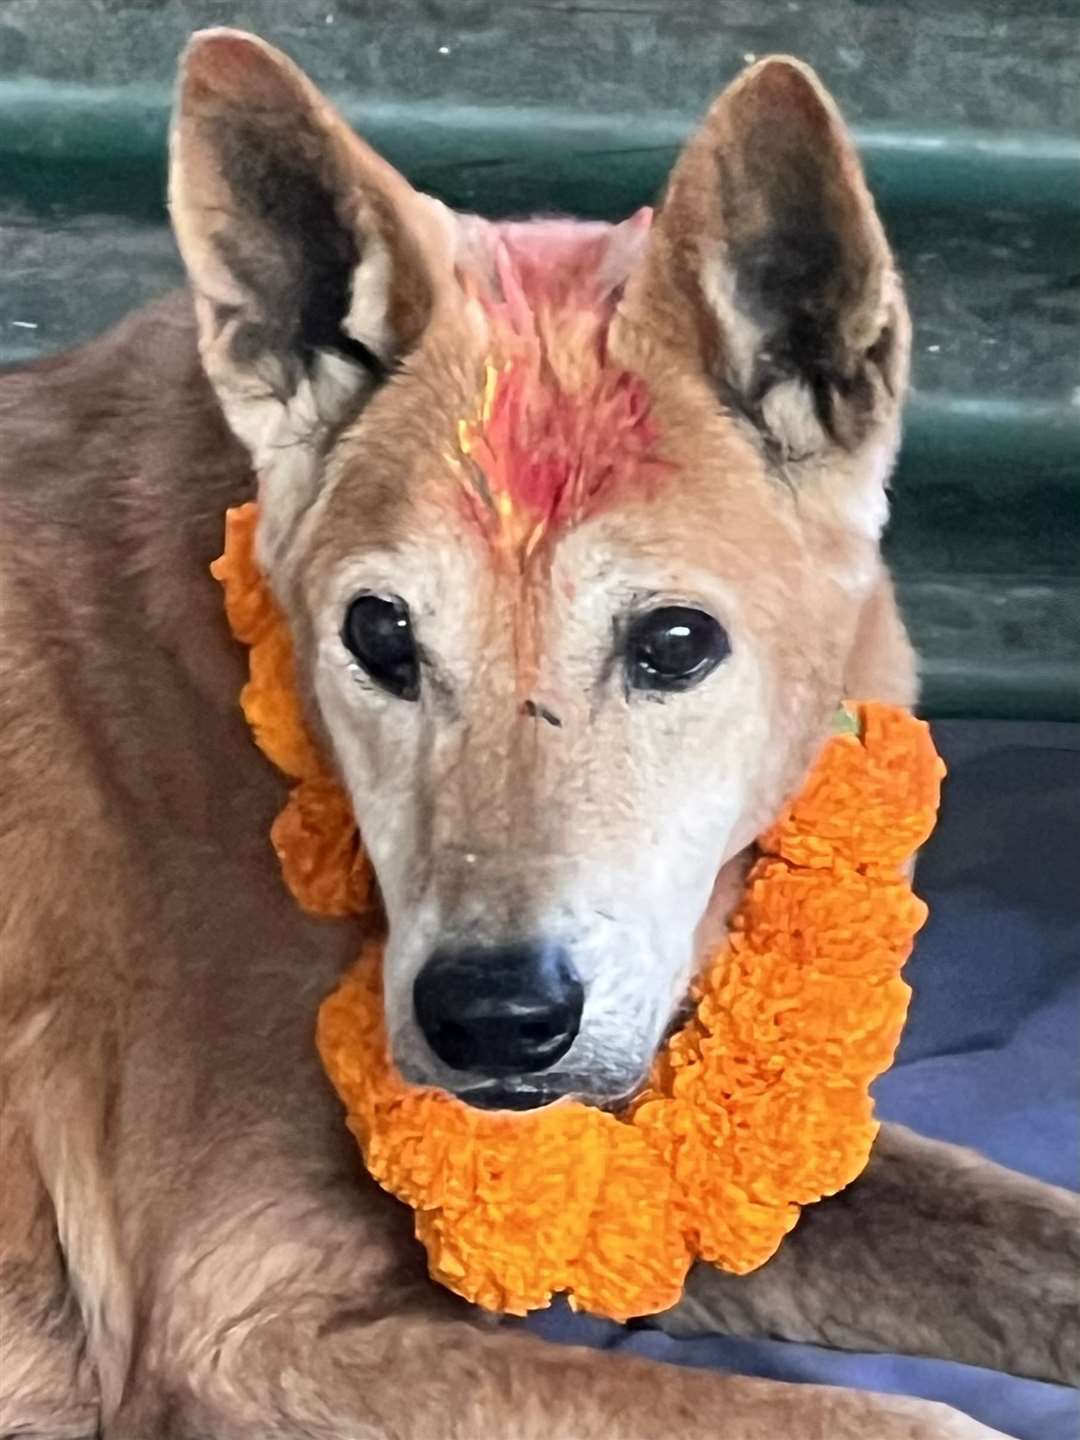 The shelter celebrated the Day of the Dogs Festival ‘Kukur Tihar’ by painting a streak of vermilion on the dogs’ foreheads and putting garlands of flowers round their necks.